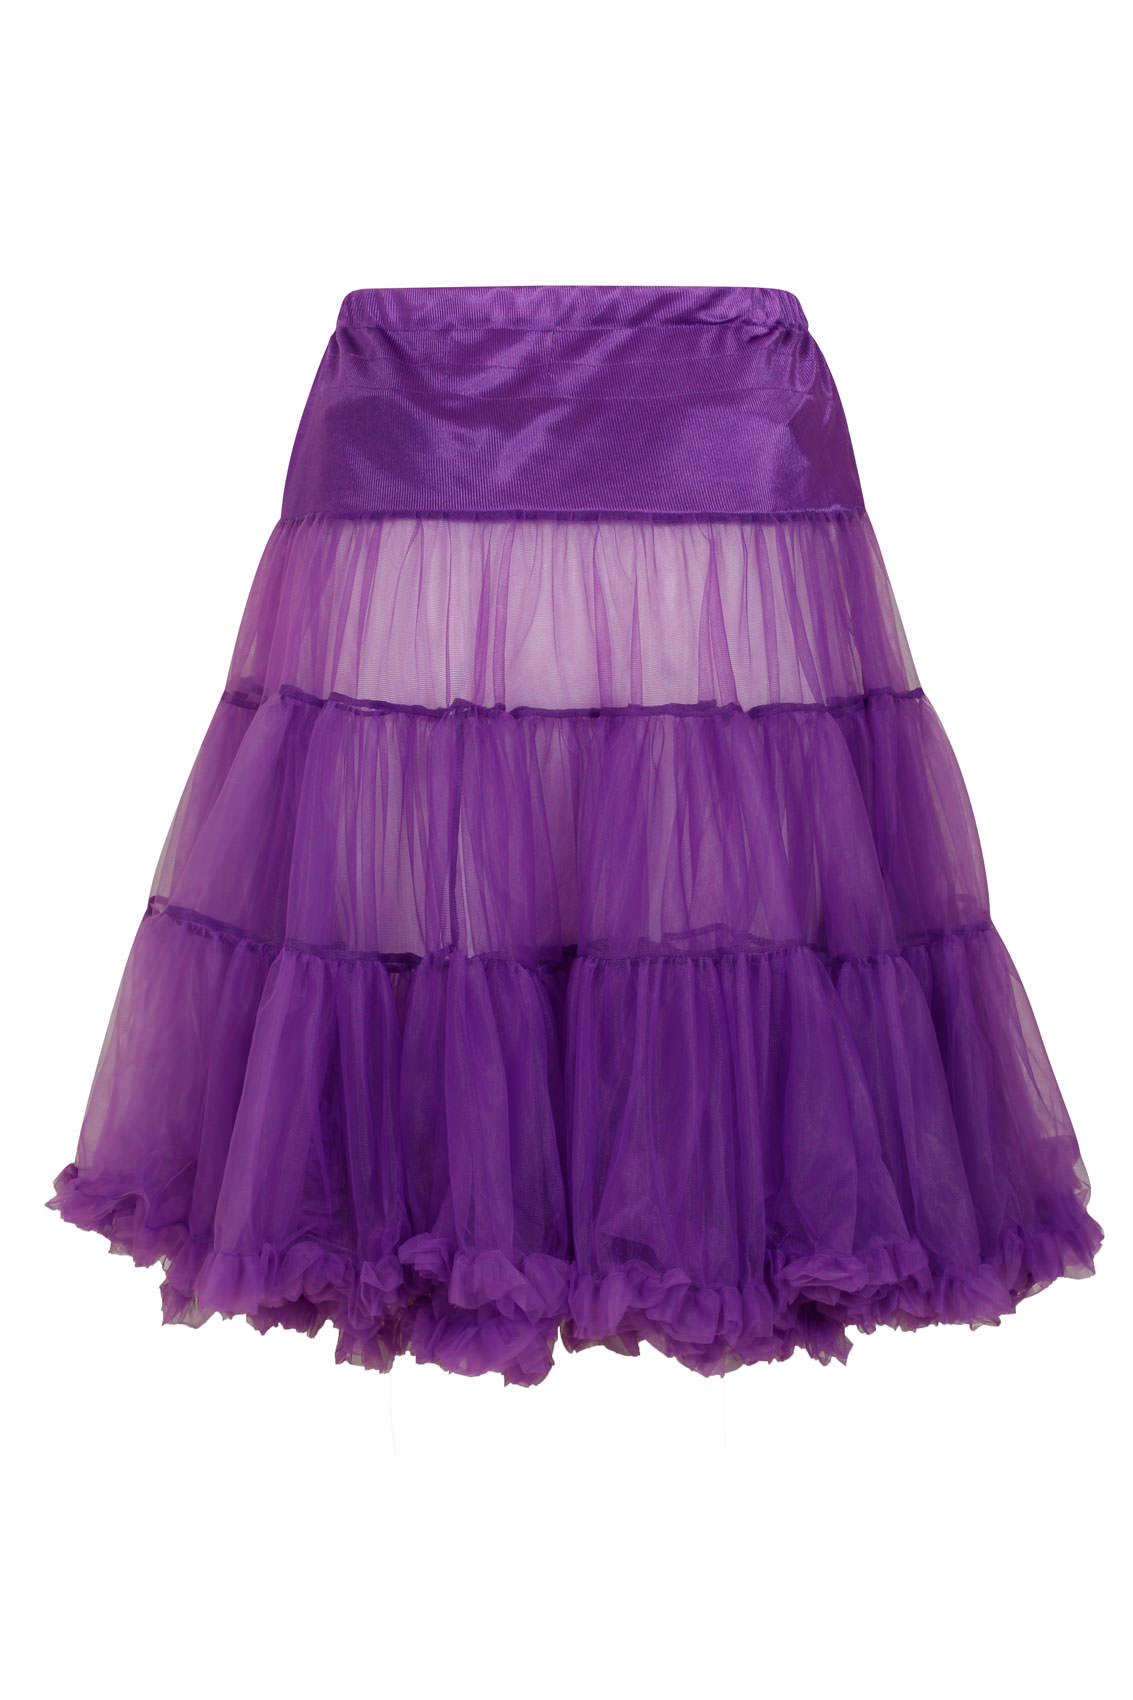 HELL BUNNY Purple Petticoat Flare Skirt, Plus size 16 to 22